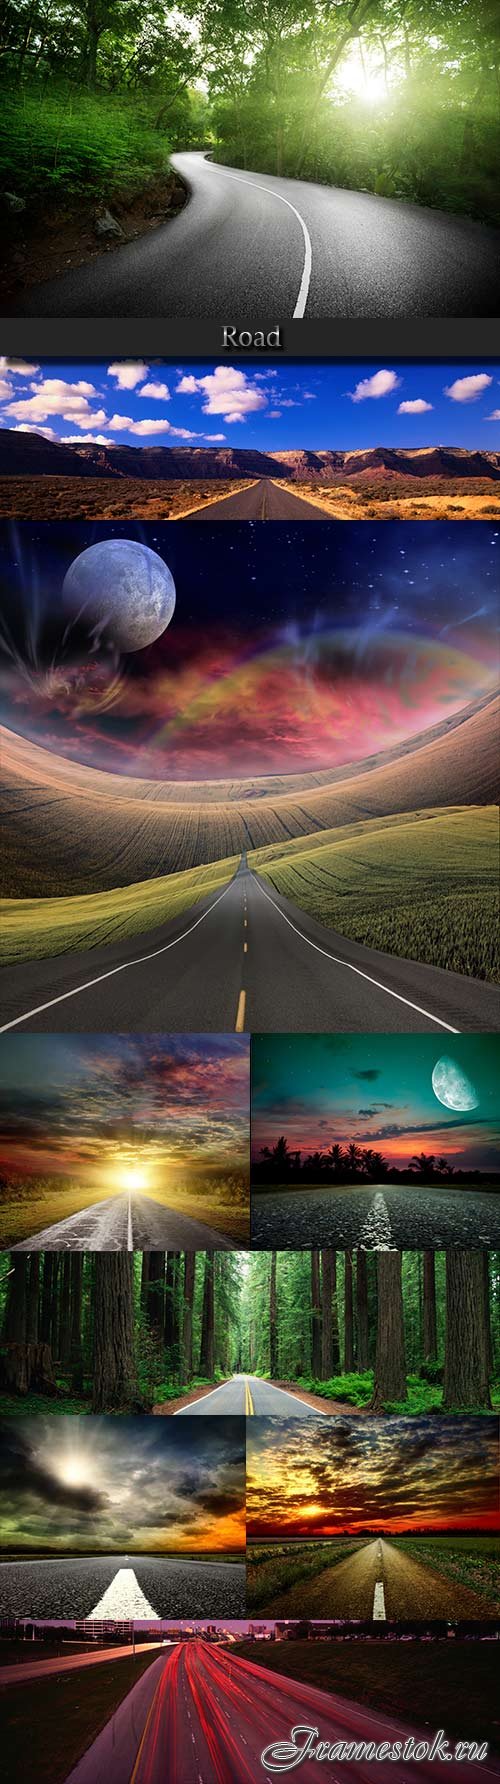 The road raster graphics